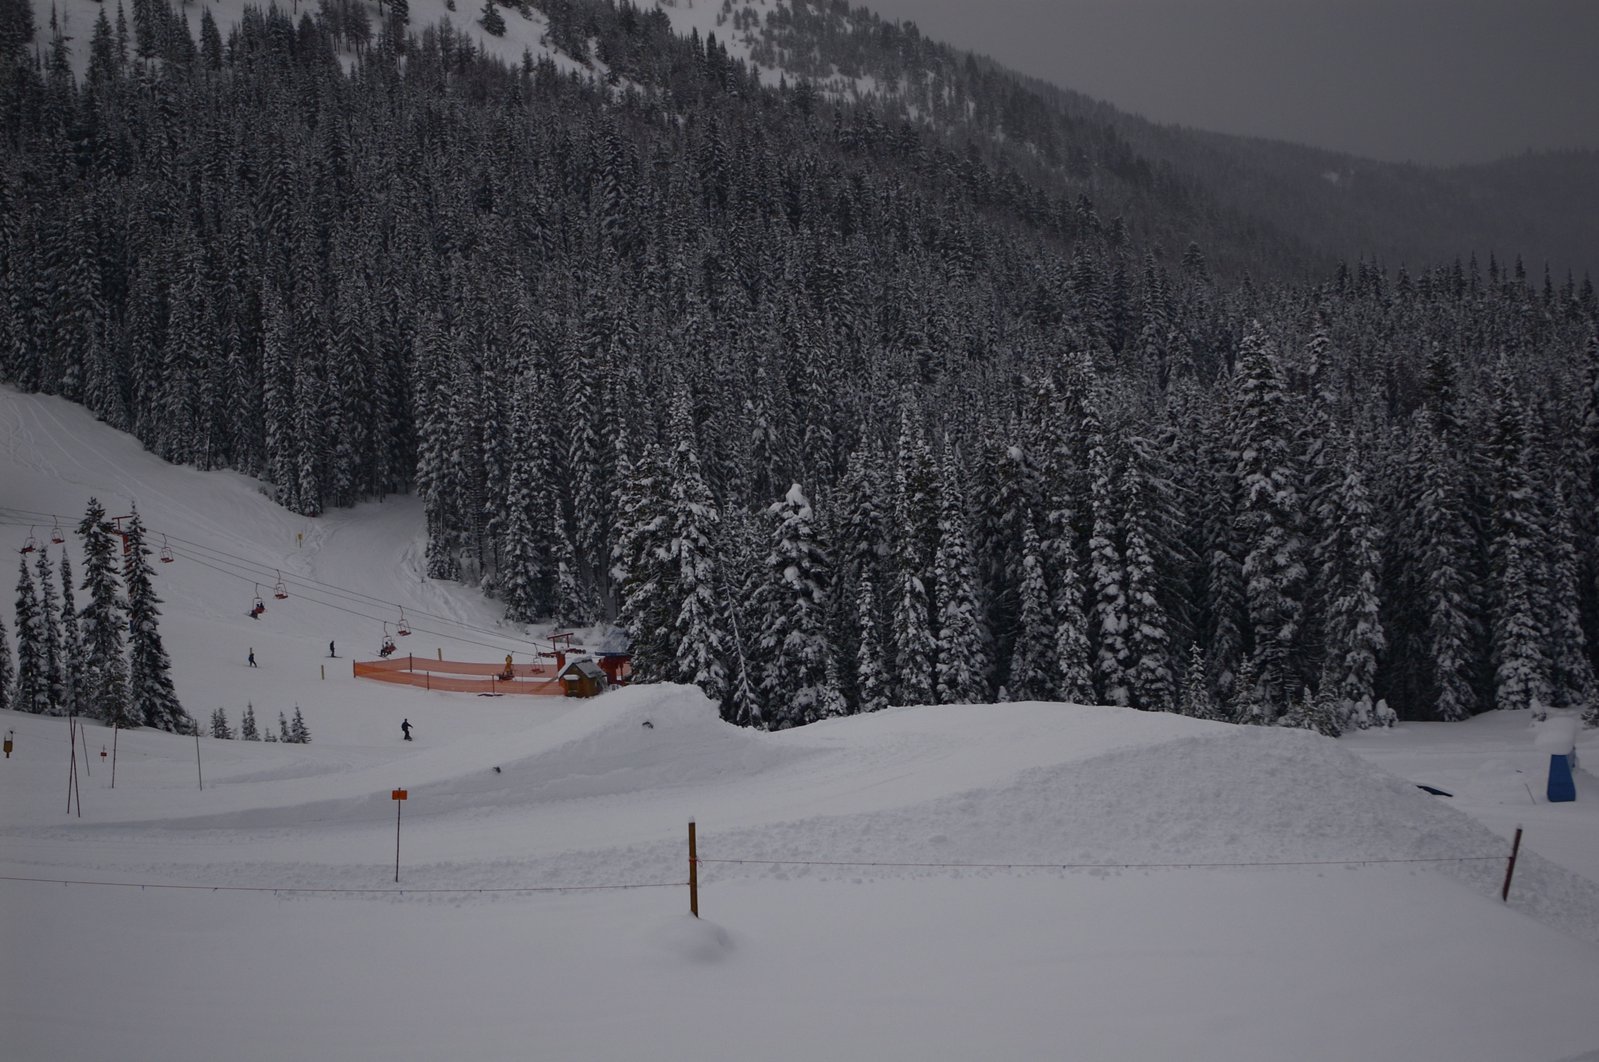 New jumps at Manning Park